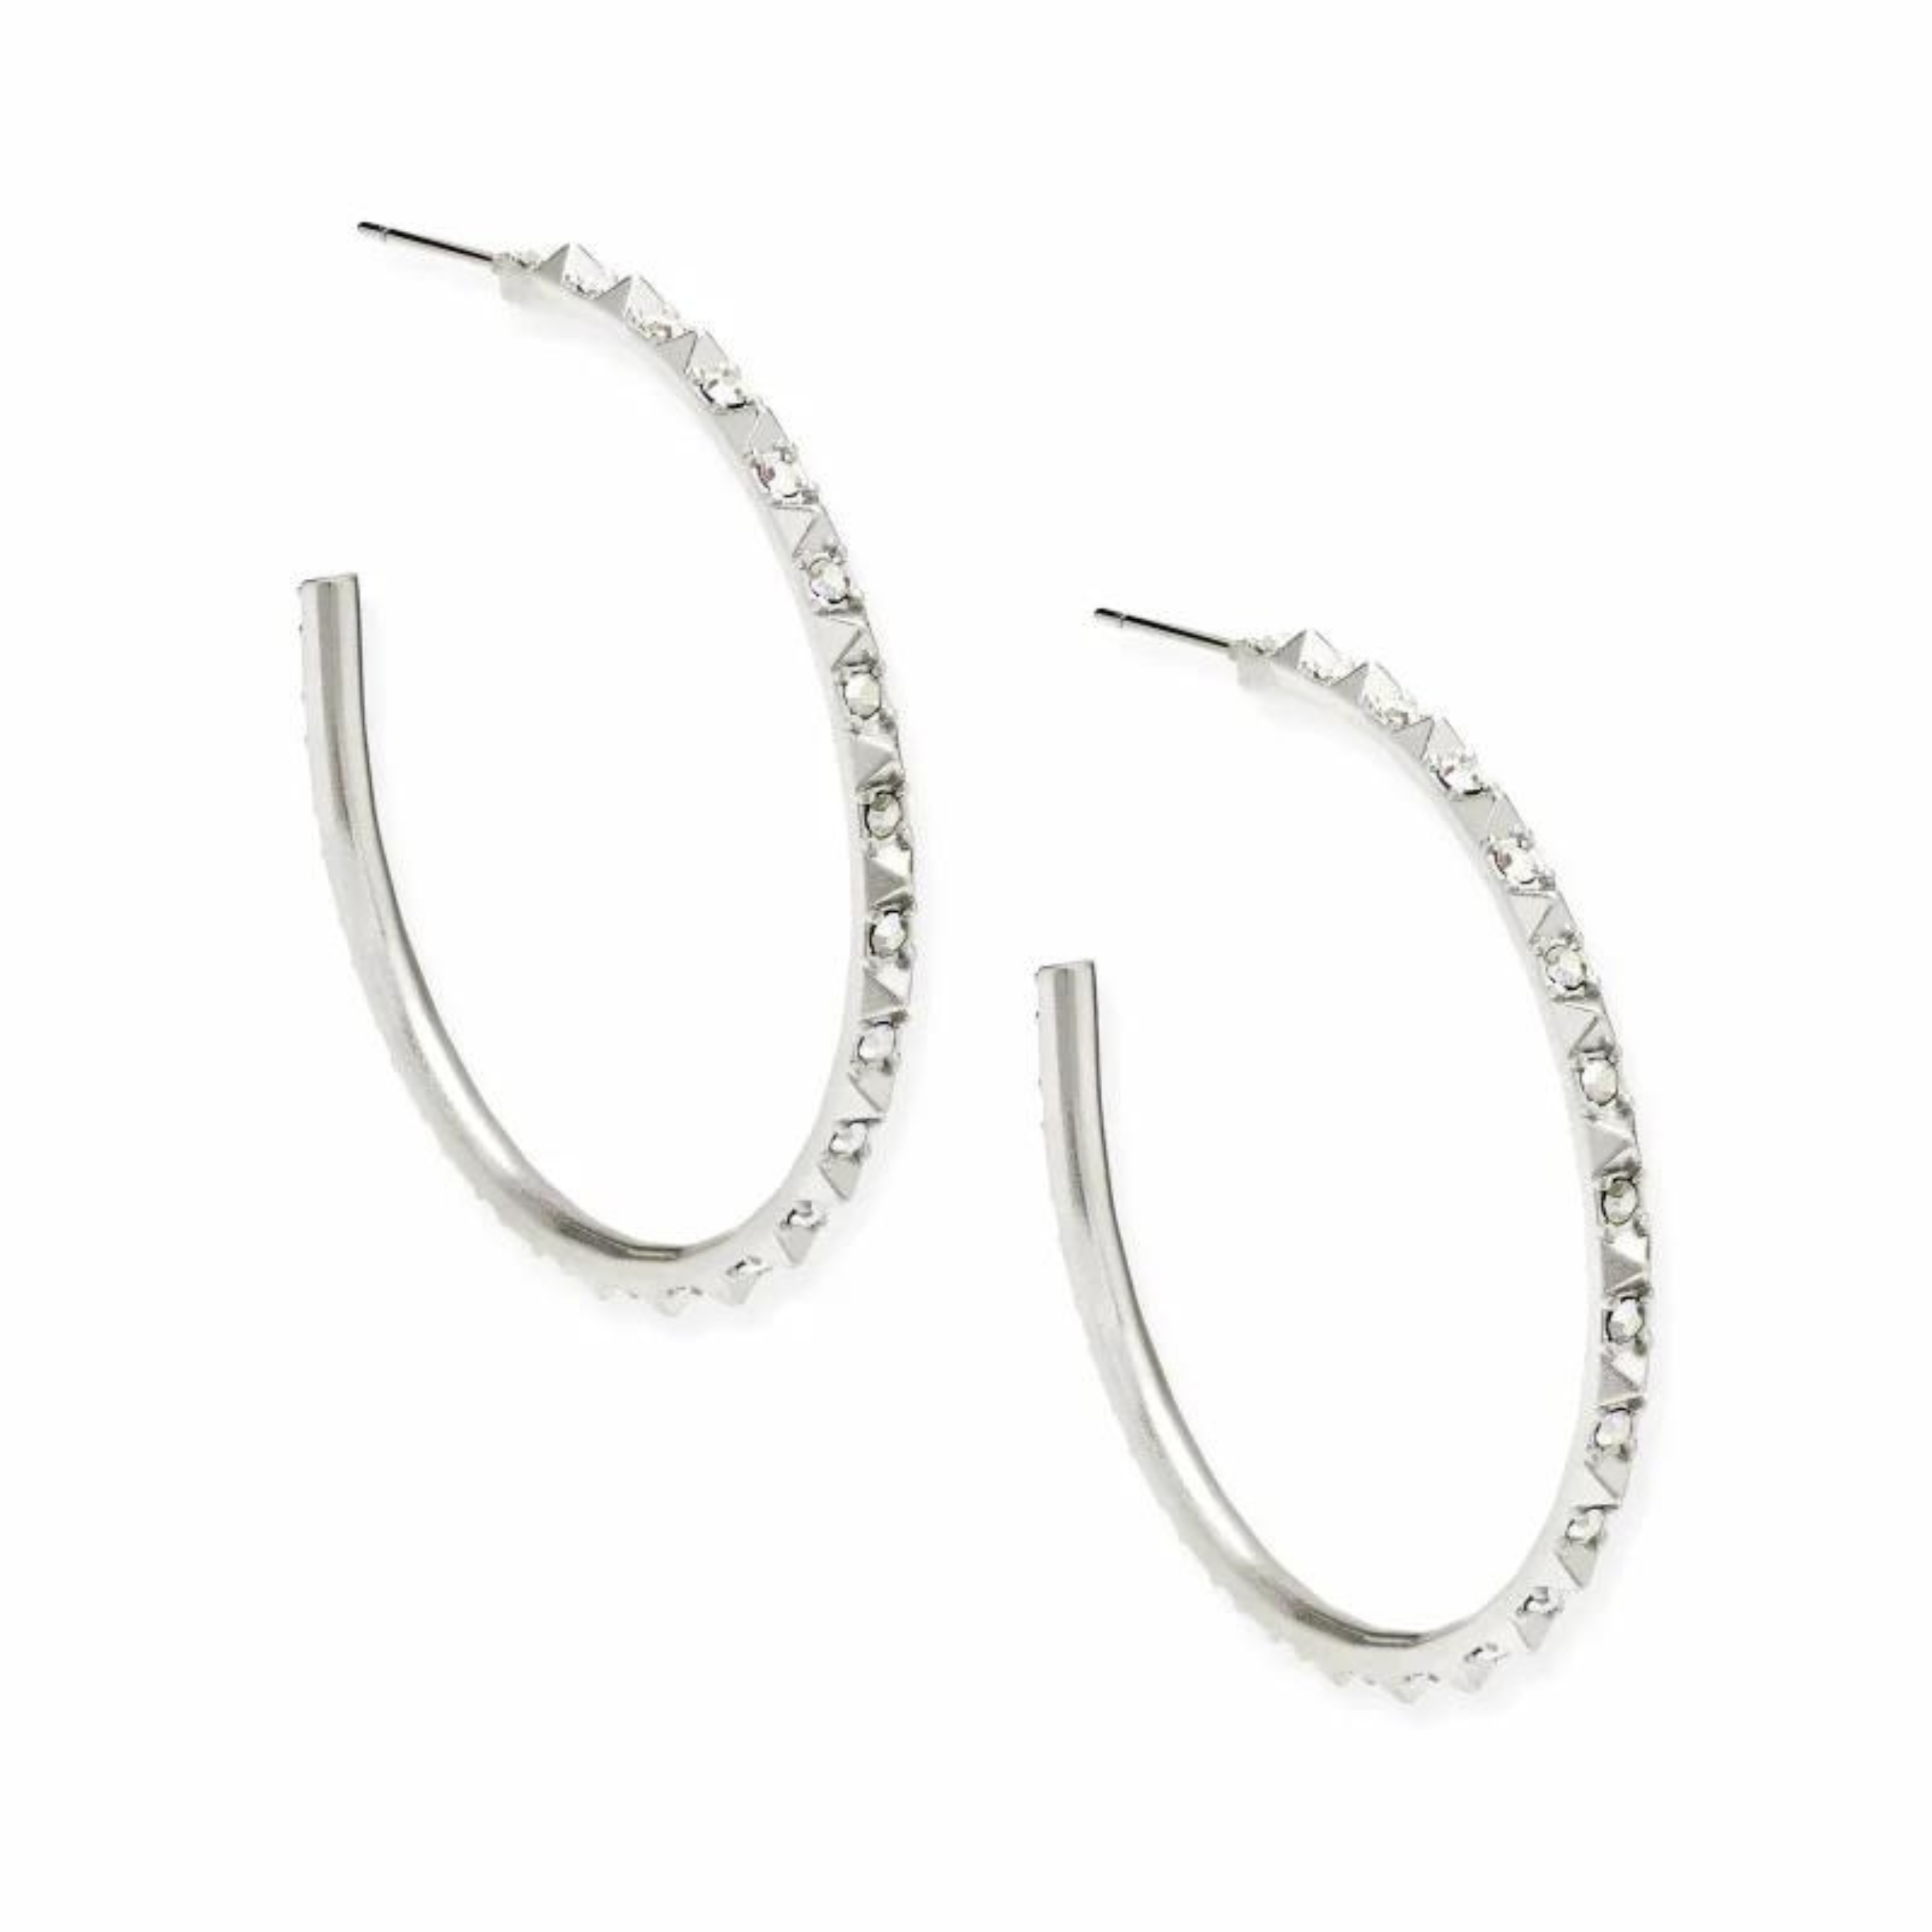 Silver hoop earrings with iridescent crystals, pictured on a white background.